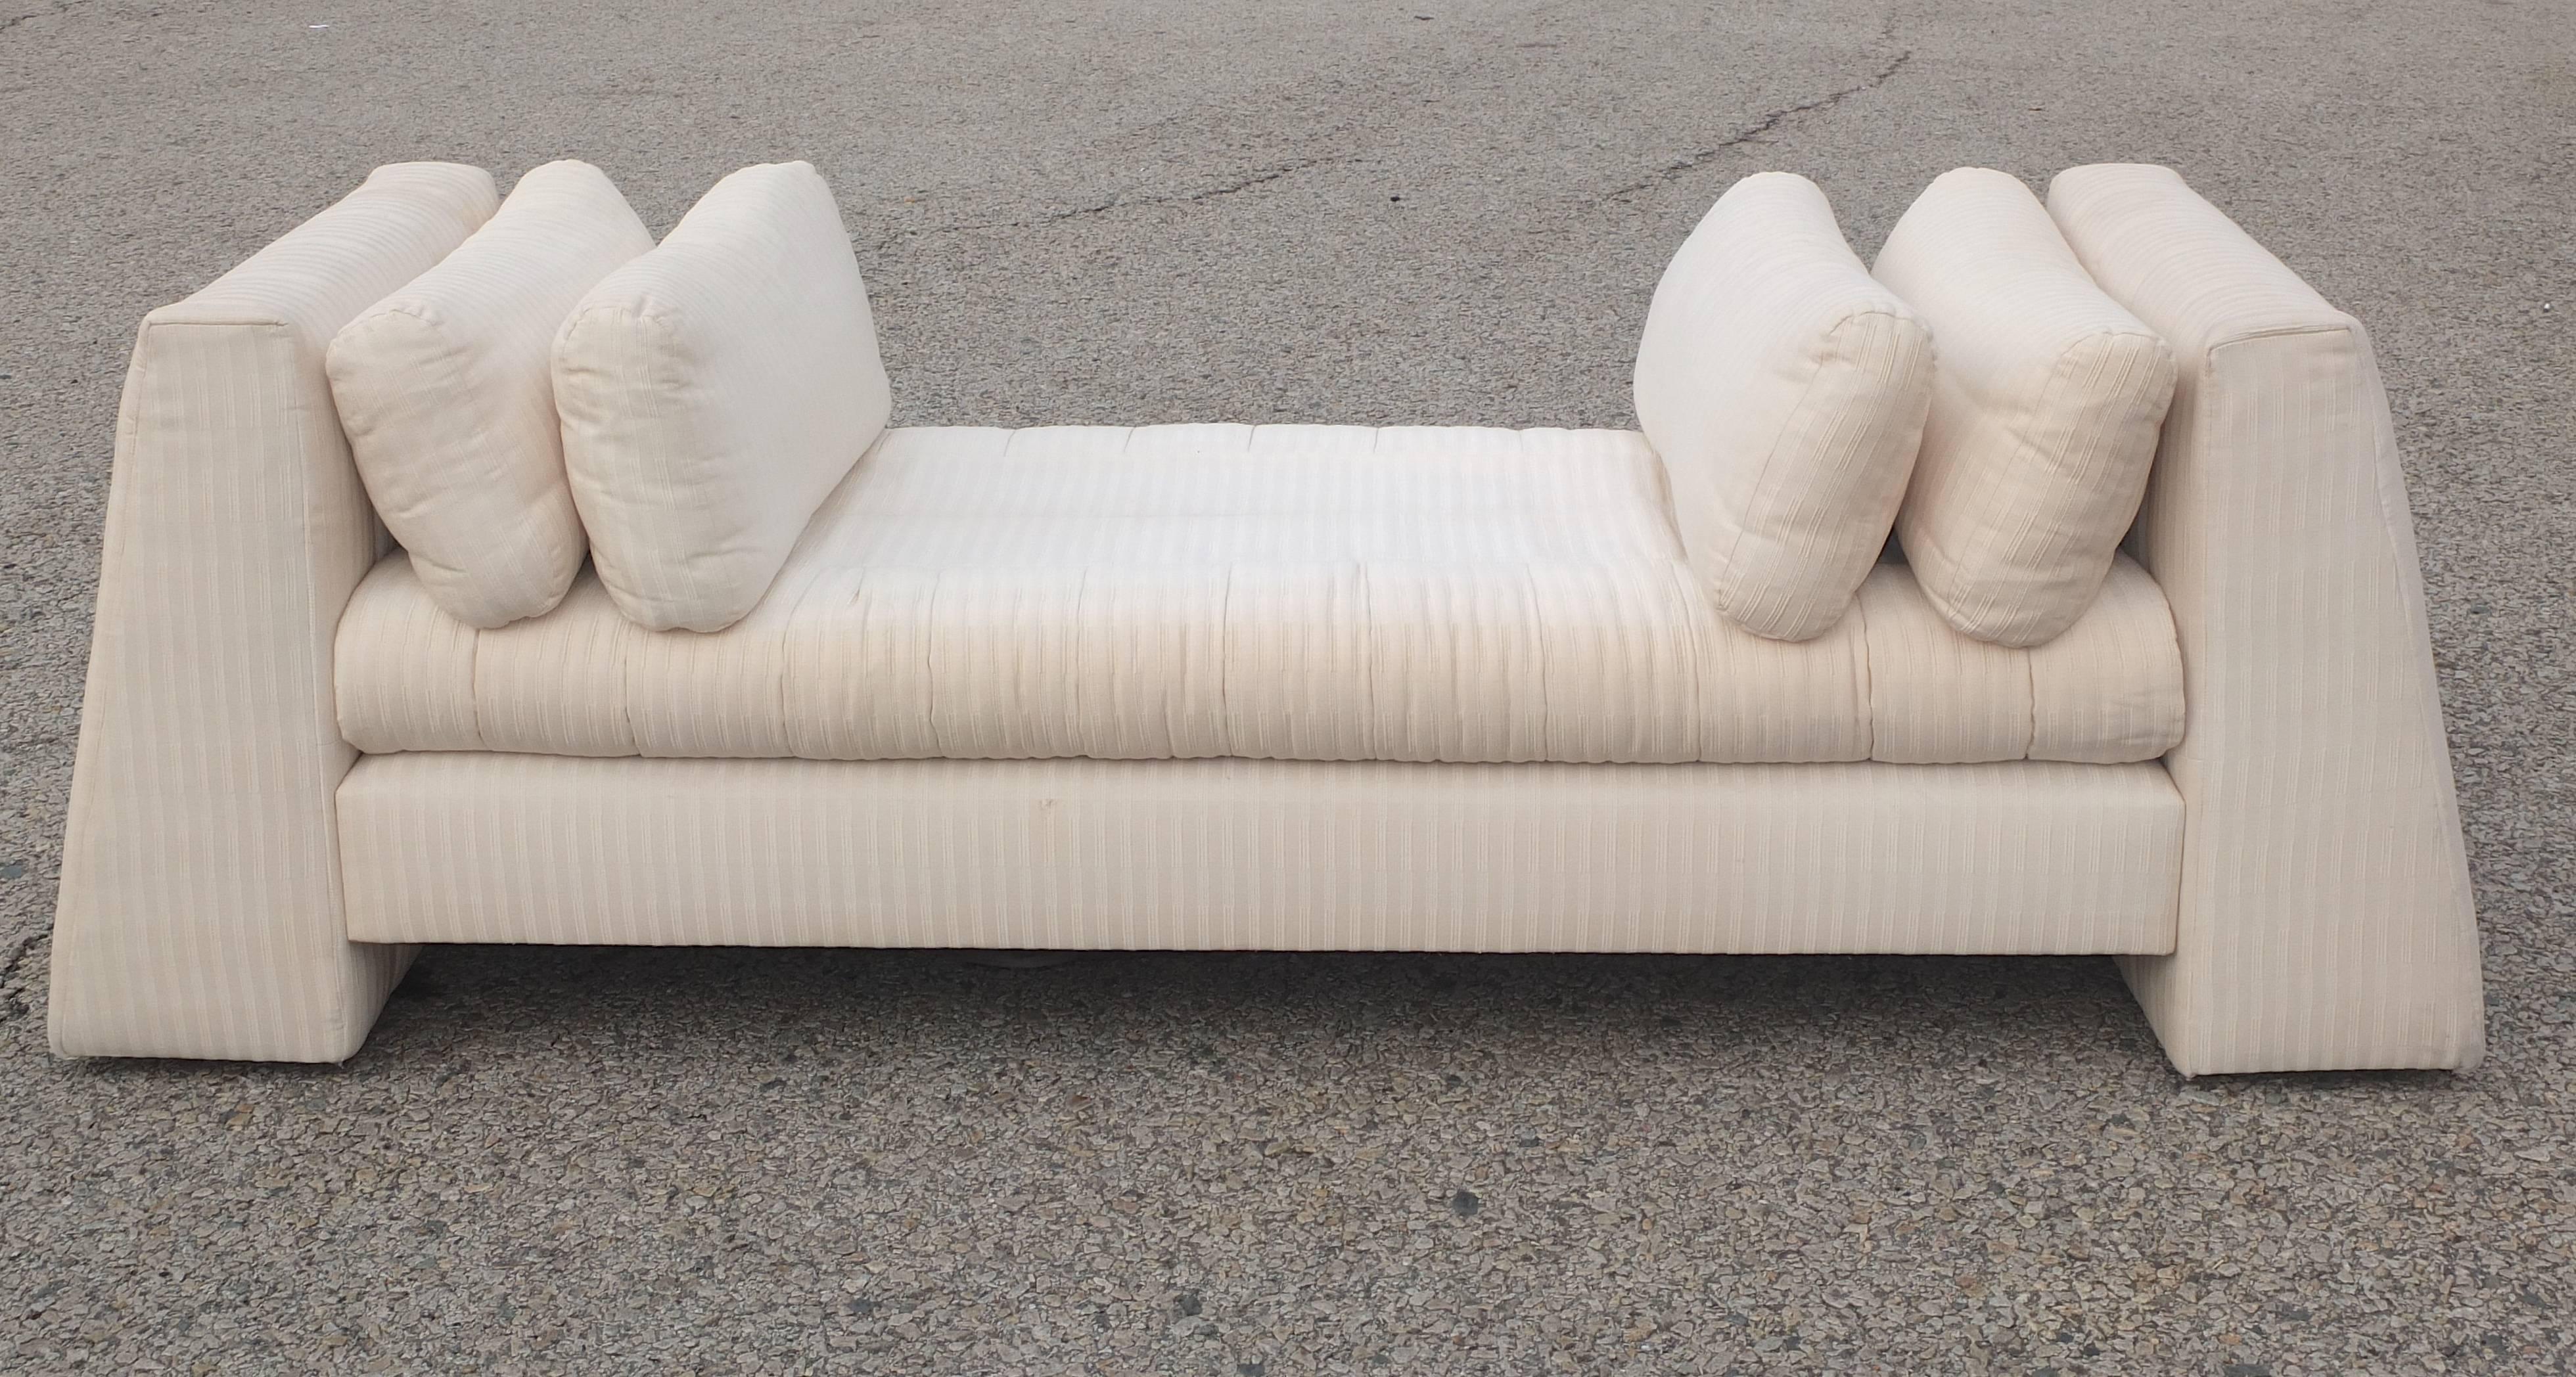 Custom upholstered long divan or chaise lounge designed by Juan Montoya for a published interiors project completed in 1991 in Georgetown DC. Fabricated and upholstered by Ken Flam, raised on an upholstered base, a loose cushioned seat flanked to